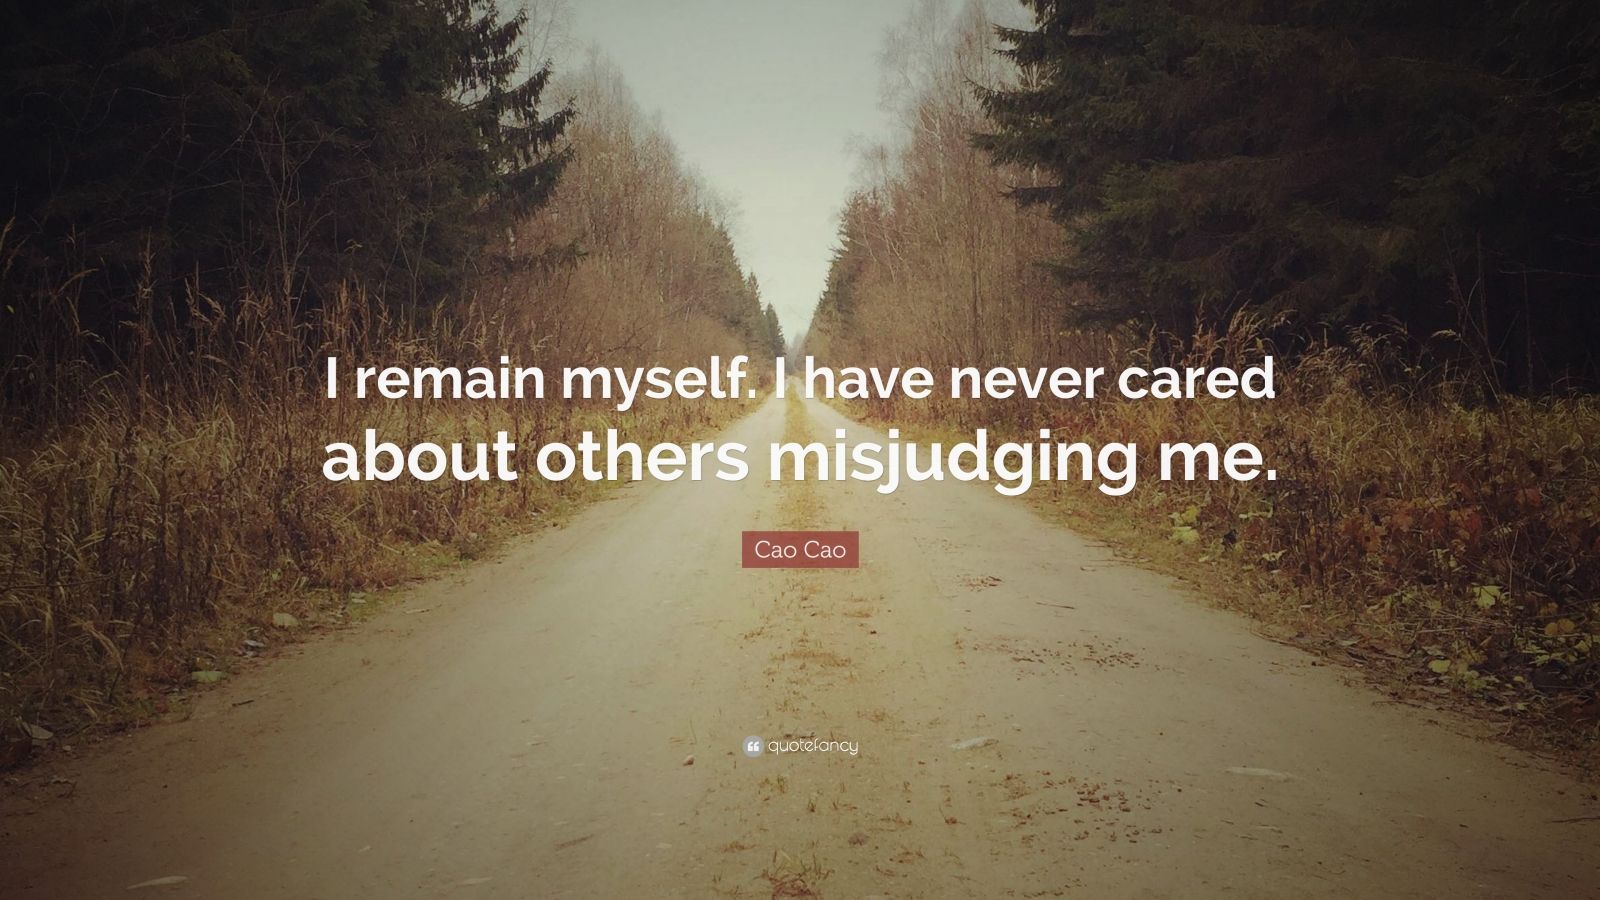 Cao Cao Quote: “I remain myself. I have never cared about others ...